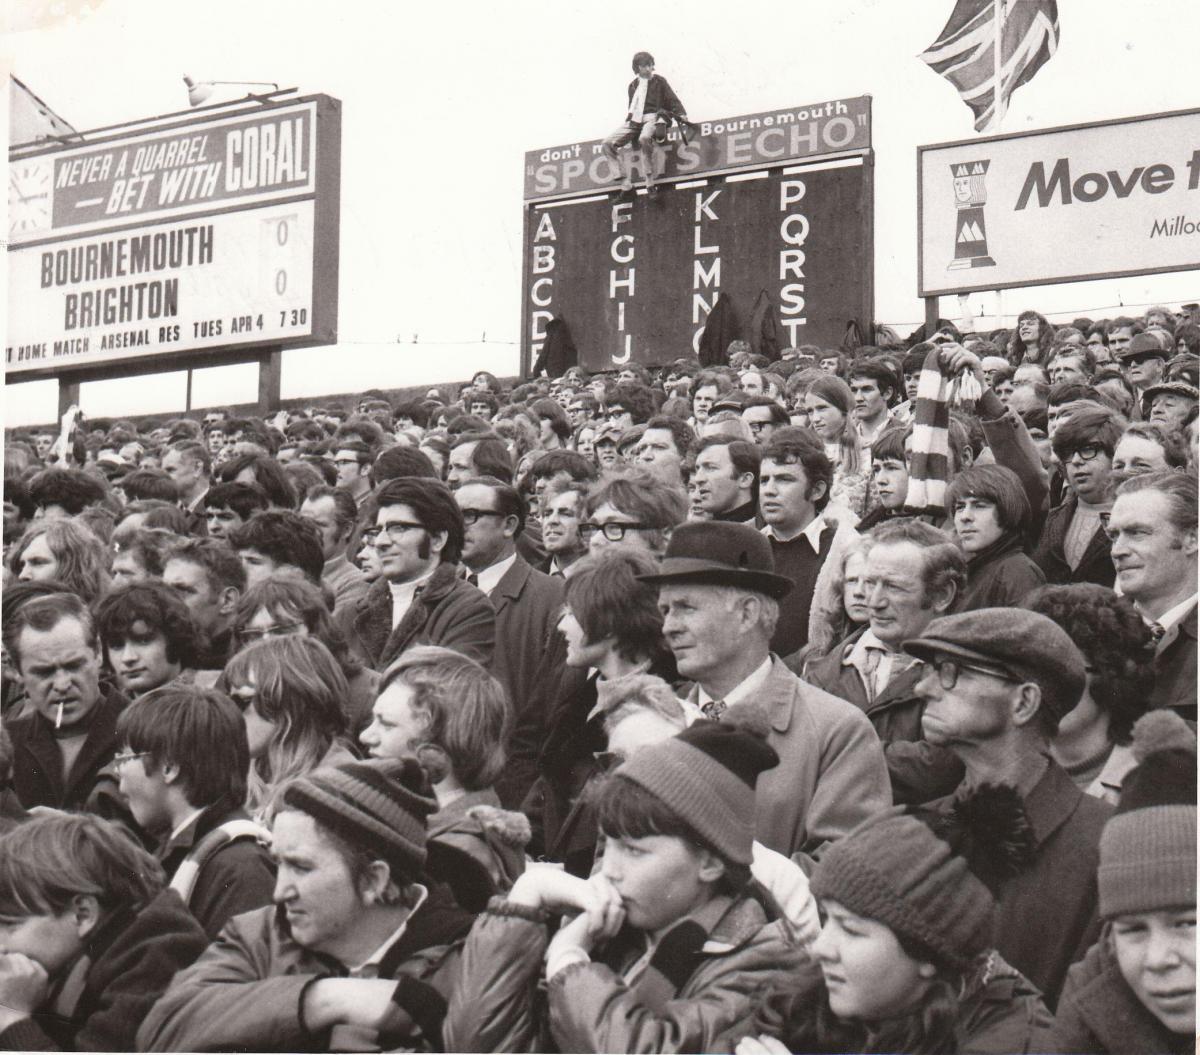 As plans are considered to increase capacity at Dean Court, we look through our archives at how the Goldsands Stadium has looked through the years